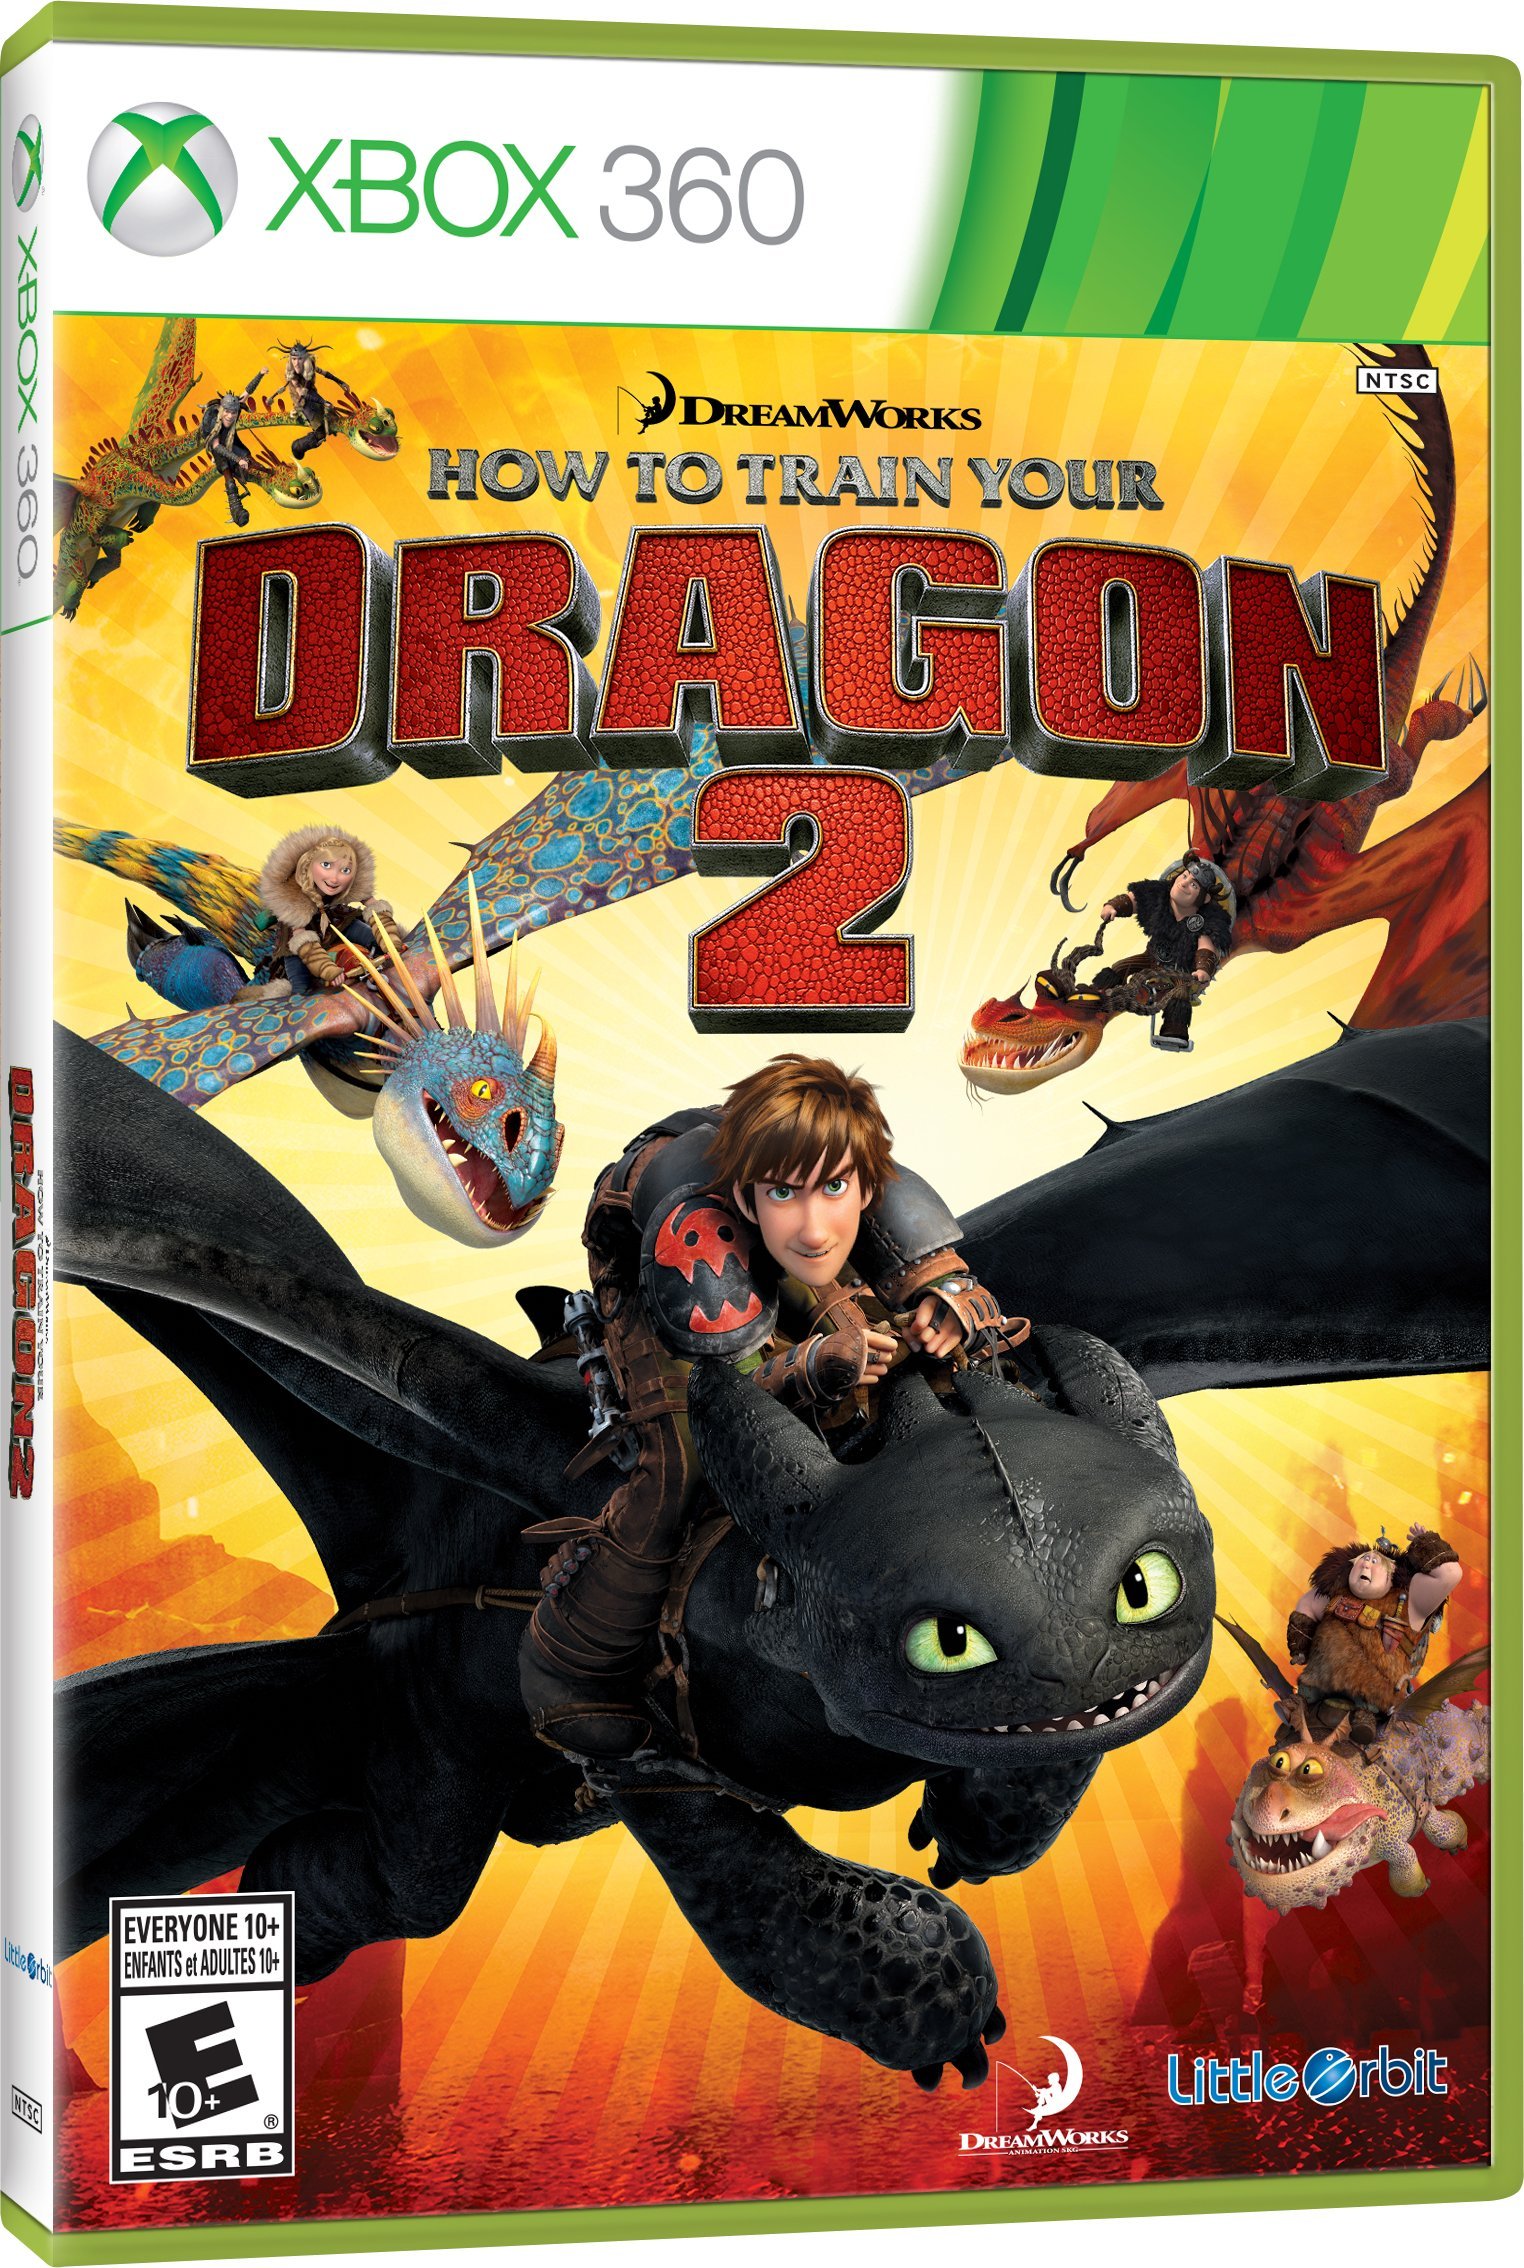 How to Train Your Dragon 2 The Video Game Release Date